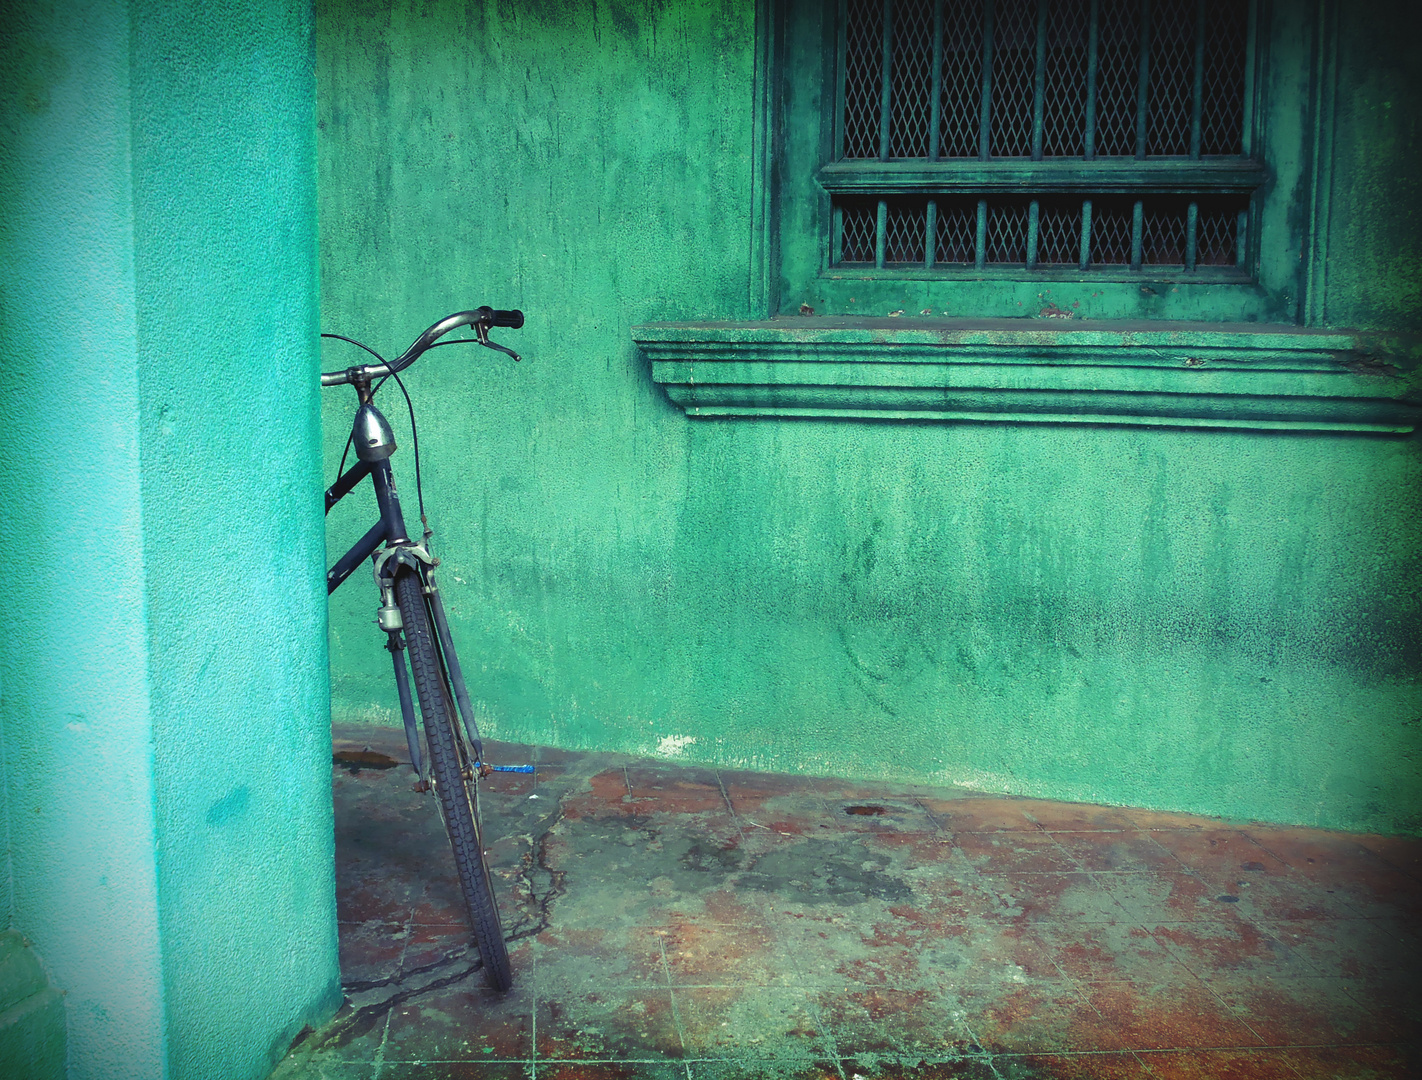 Lonely Bicycle